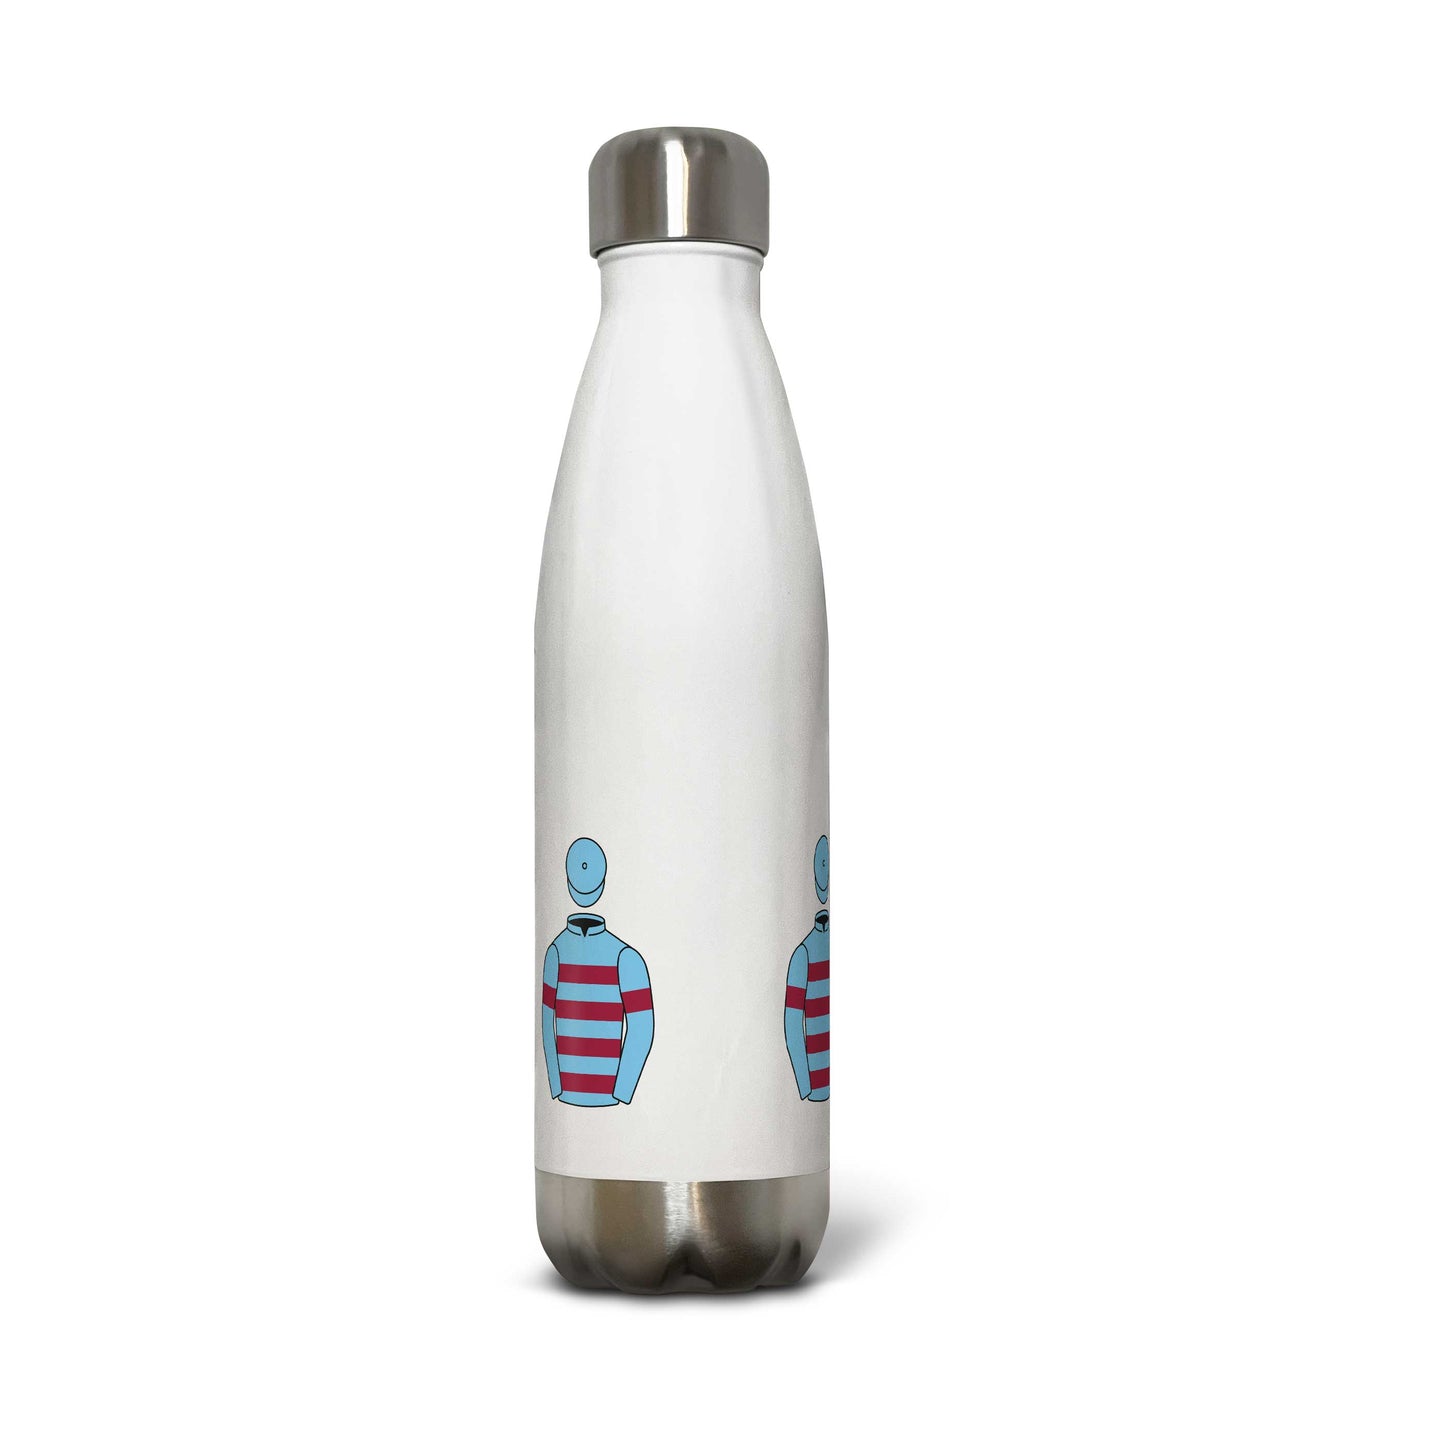 D G Staddon Horse Racing Drinks Bottle - Hacked Up Horse Racing Gifts